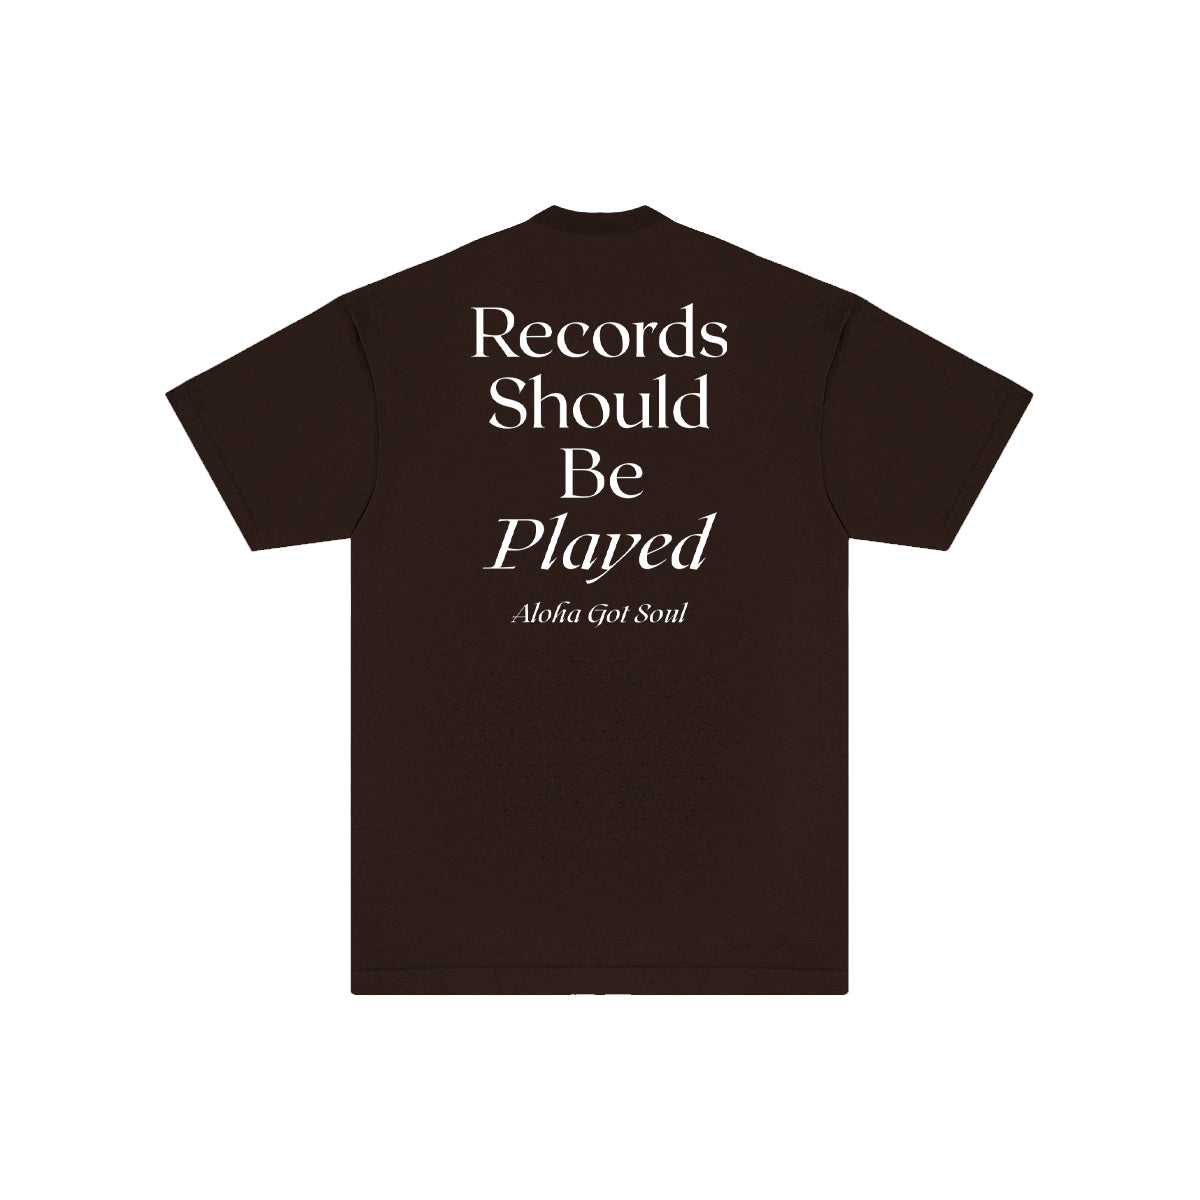 Records Should Be Played T-shirt (Chocolate / White)